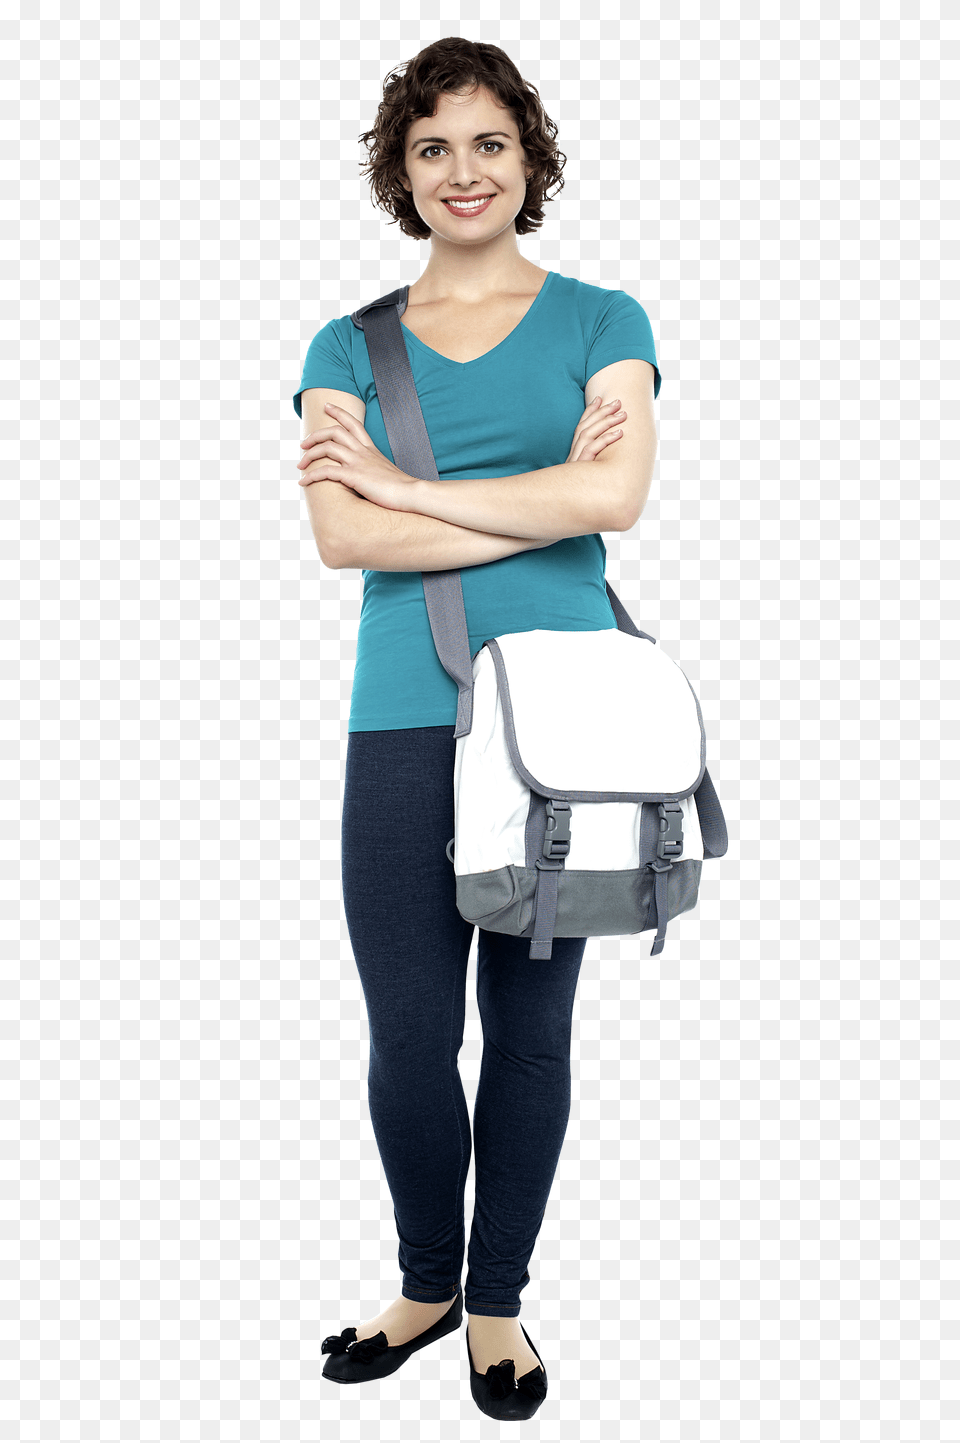 Young Girl Student Image Free Png Download